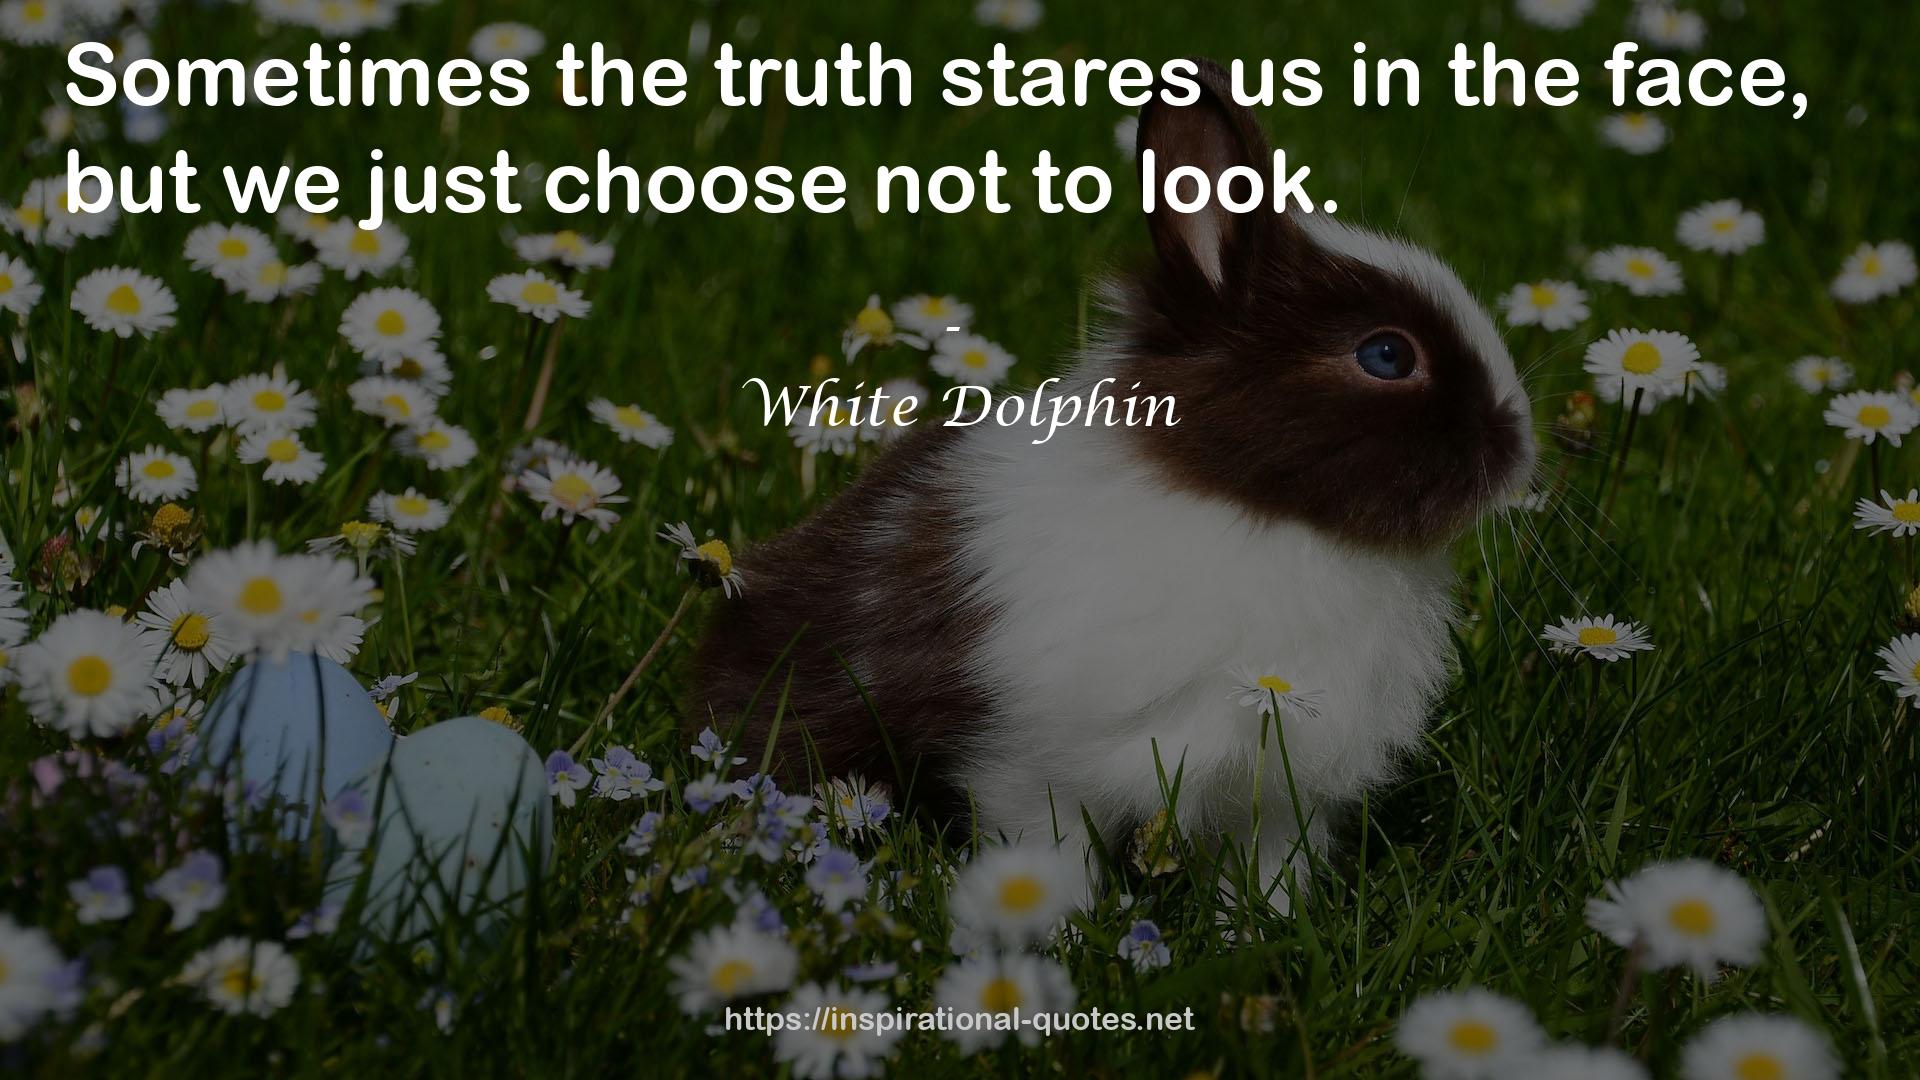 White Dolphin QUOTES